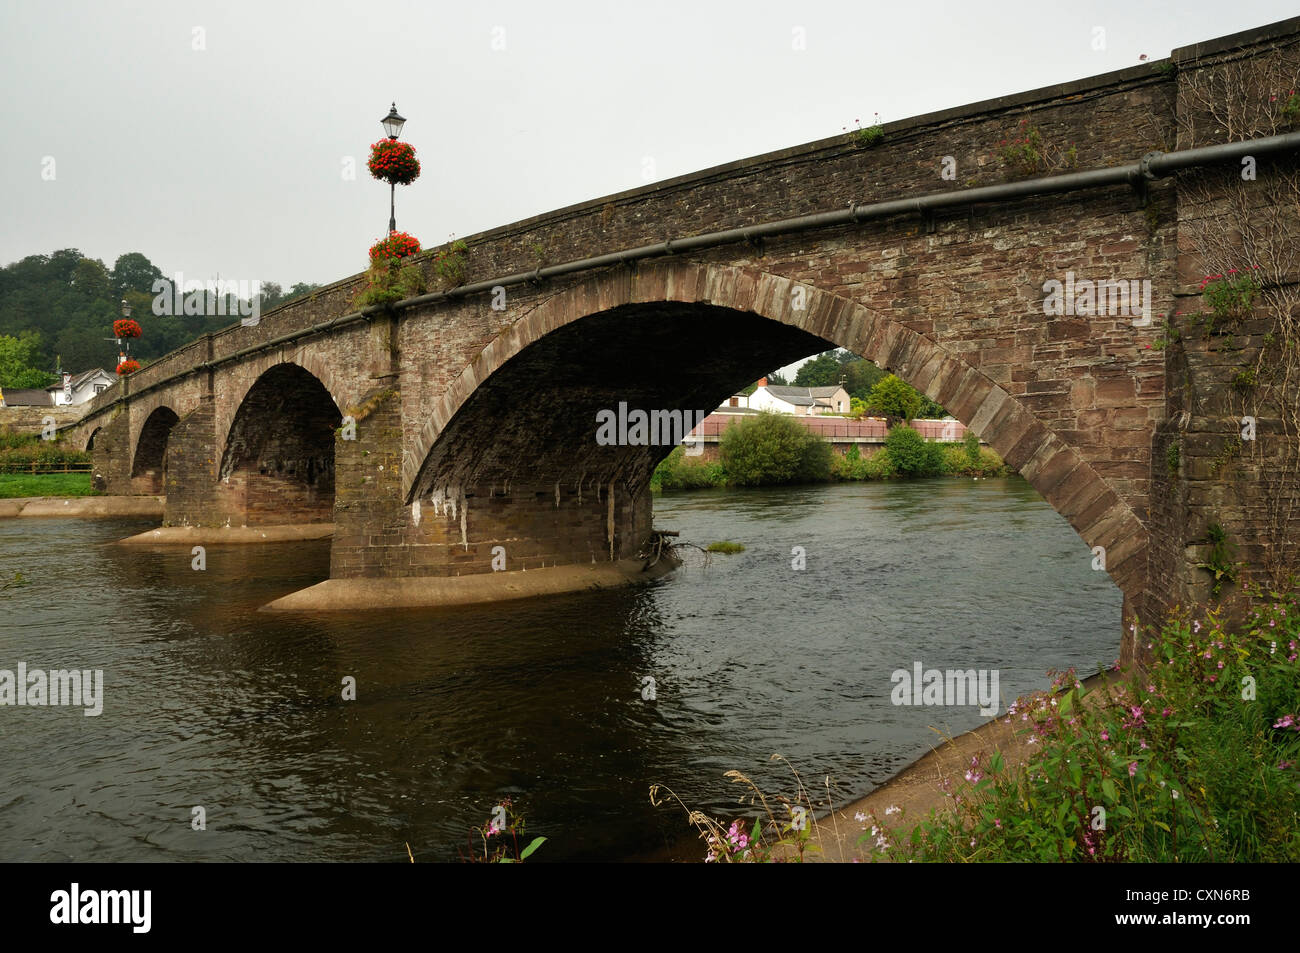 Display floreale sul ponte Usk, Usk, Monmouthshire Foto Stock